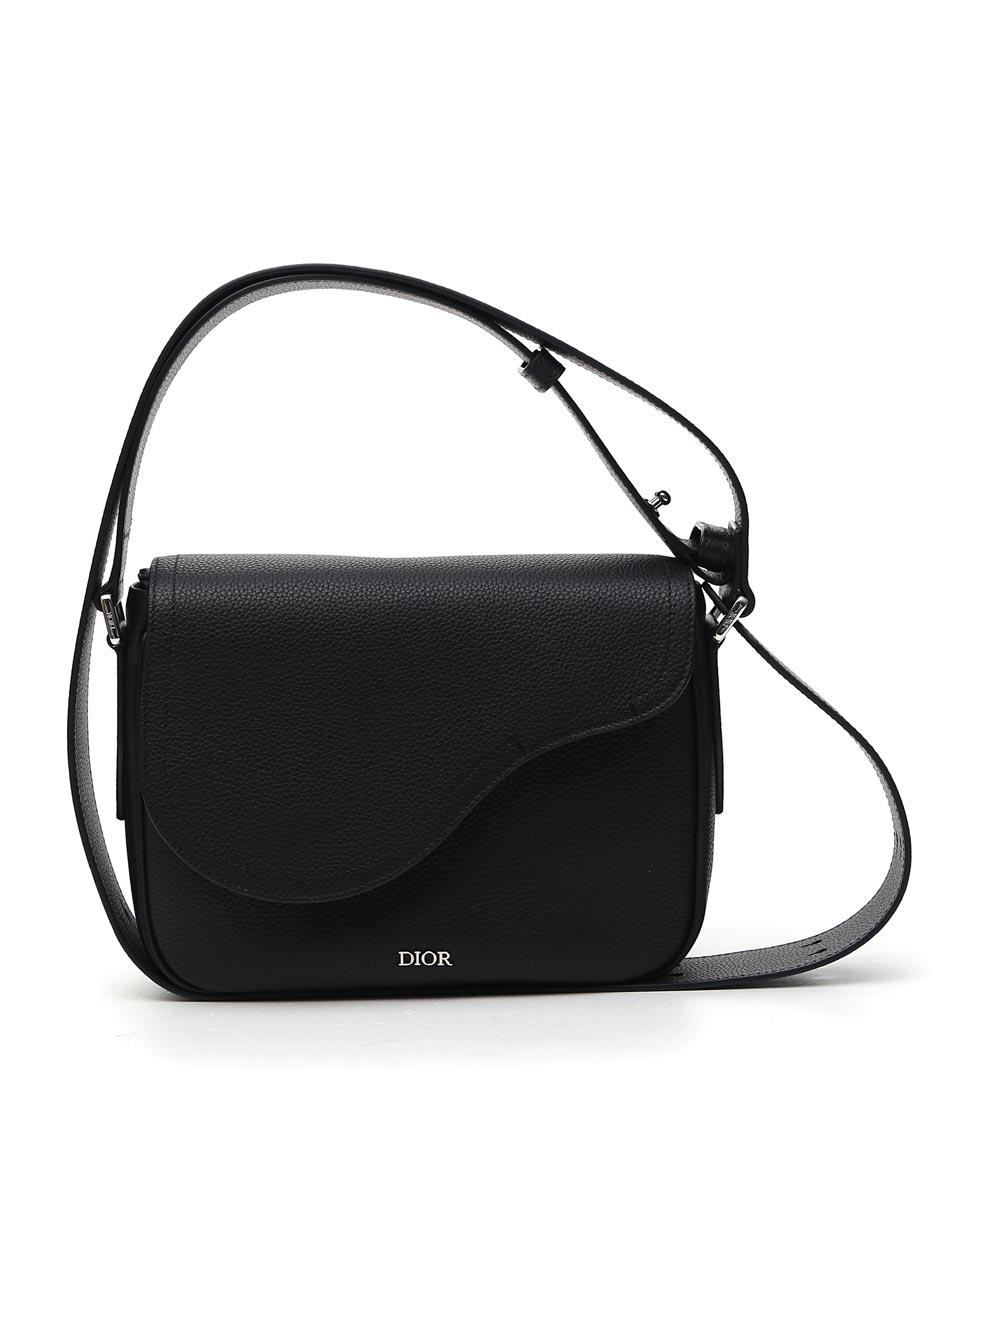 The Dior Saddle Now Comes In A Mini Messenger Format - BAGAHOLICBOY